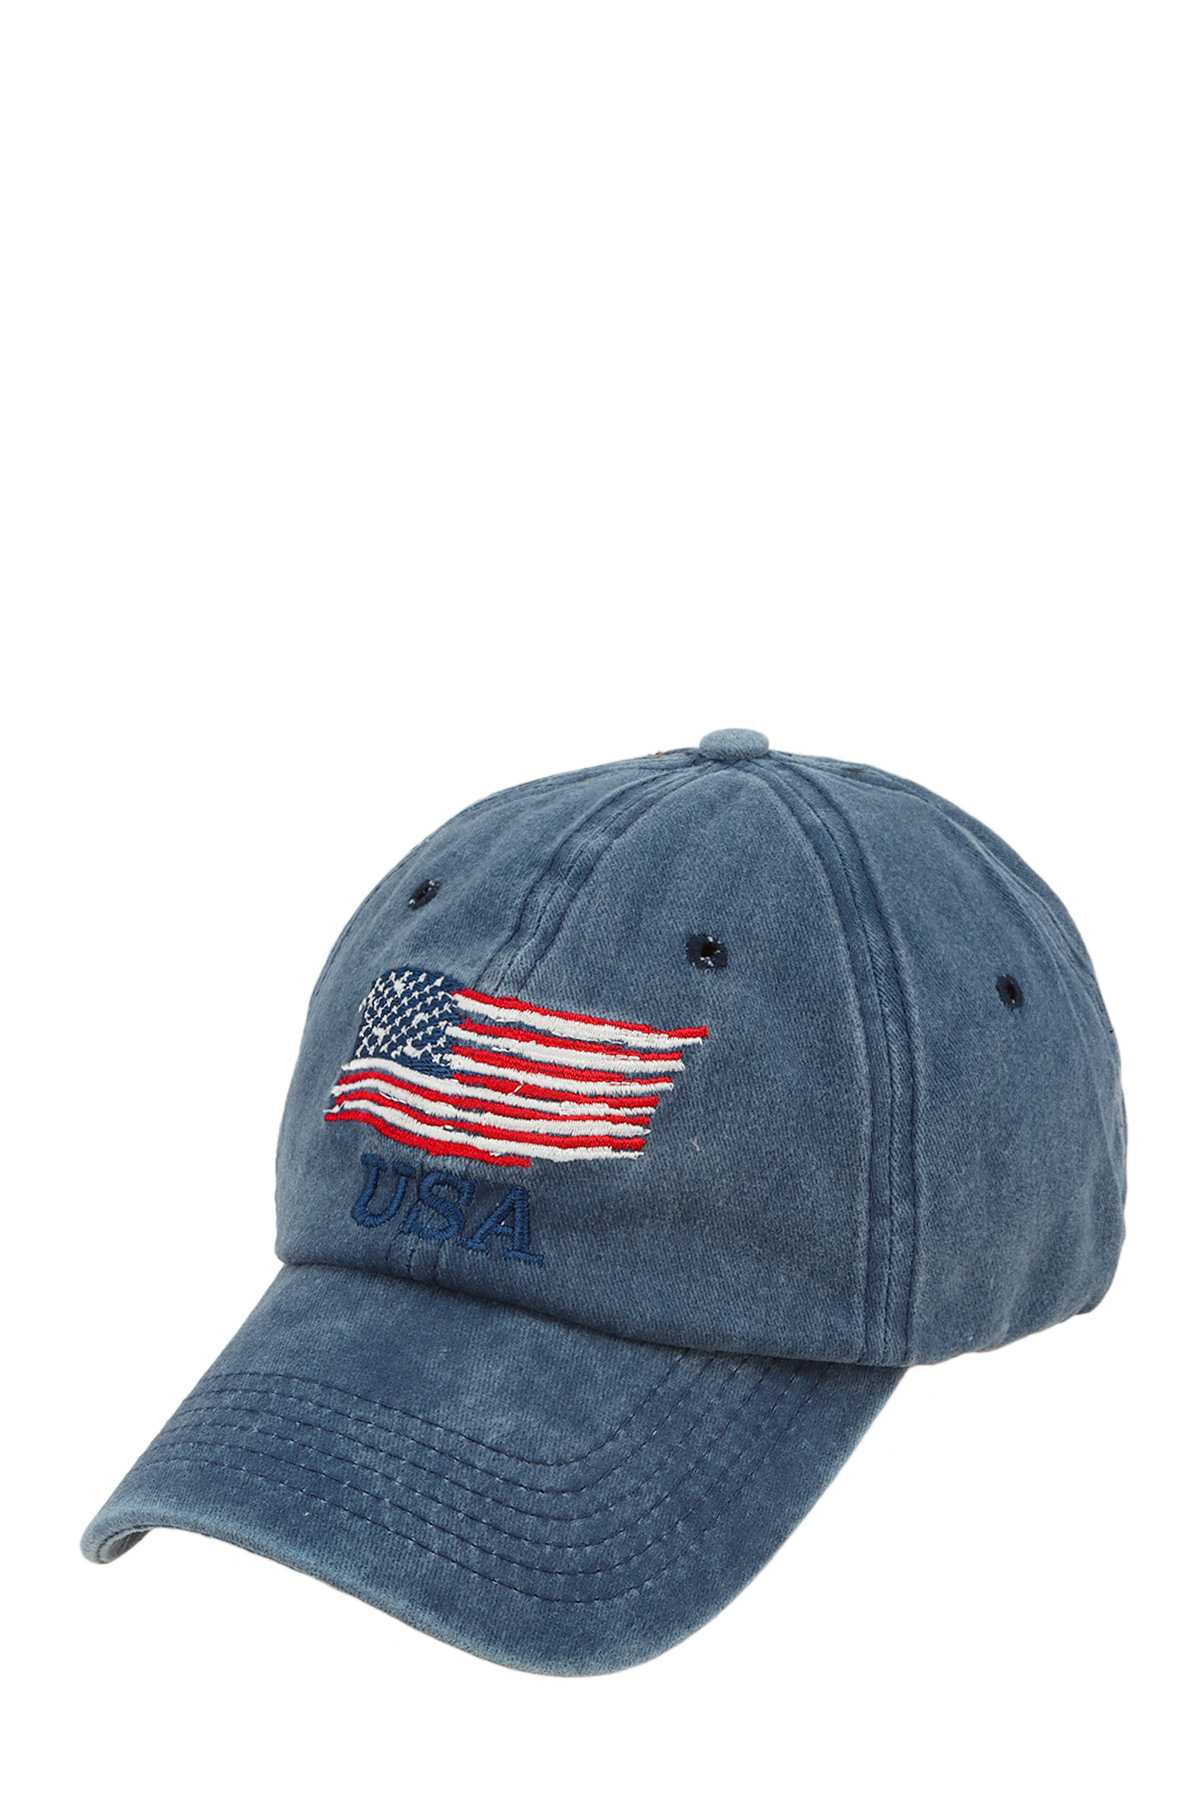 American Flag Embroidered Pigment Cap